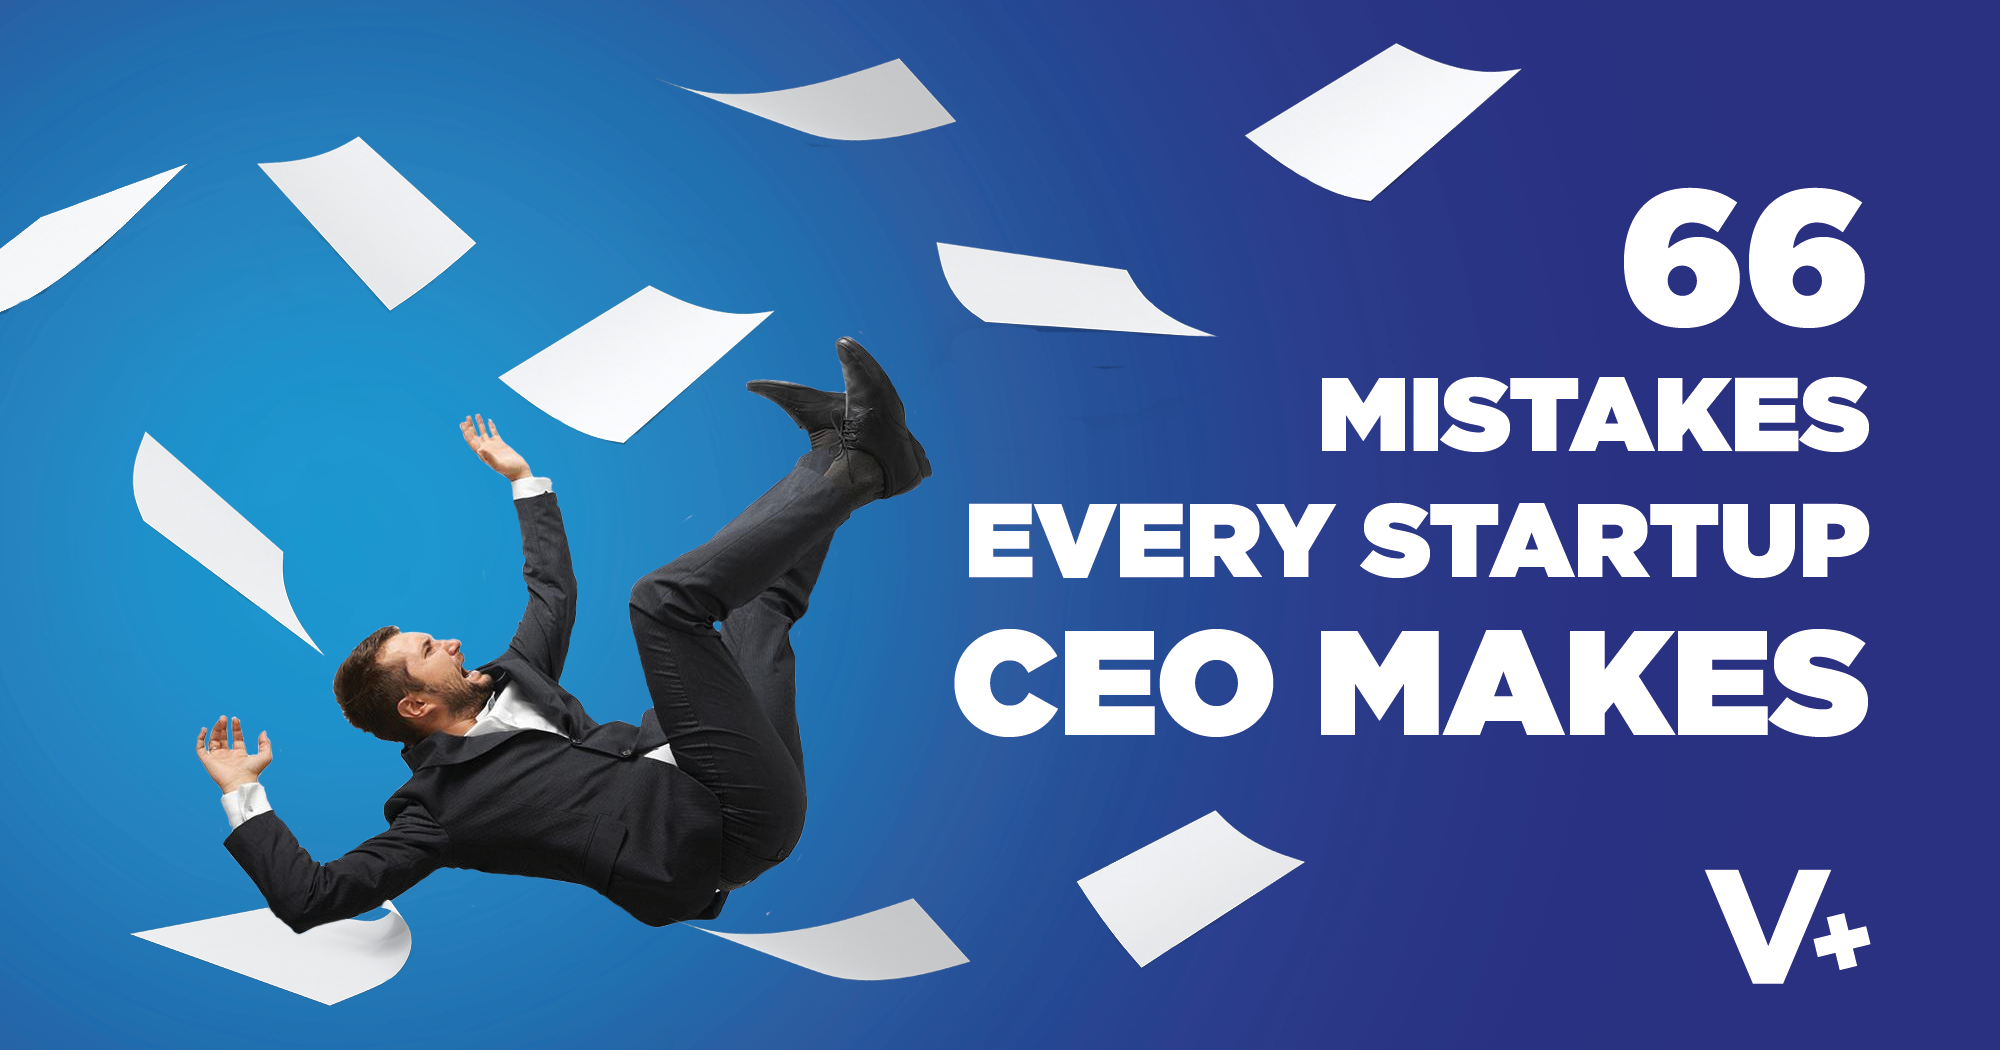 66 Mistakes Every Startup CEO Makes